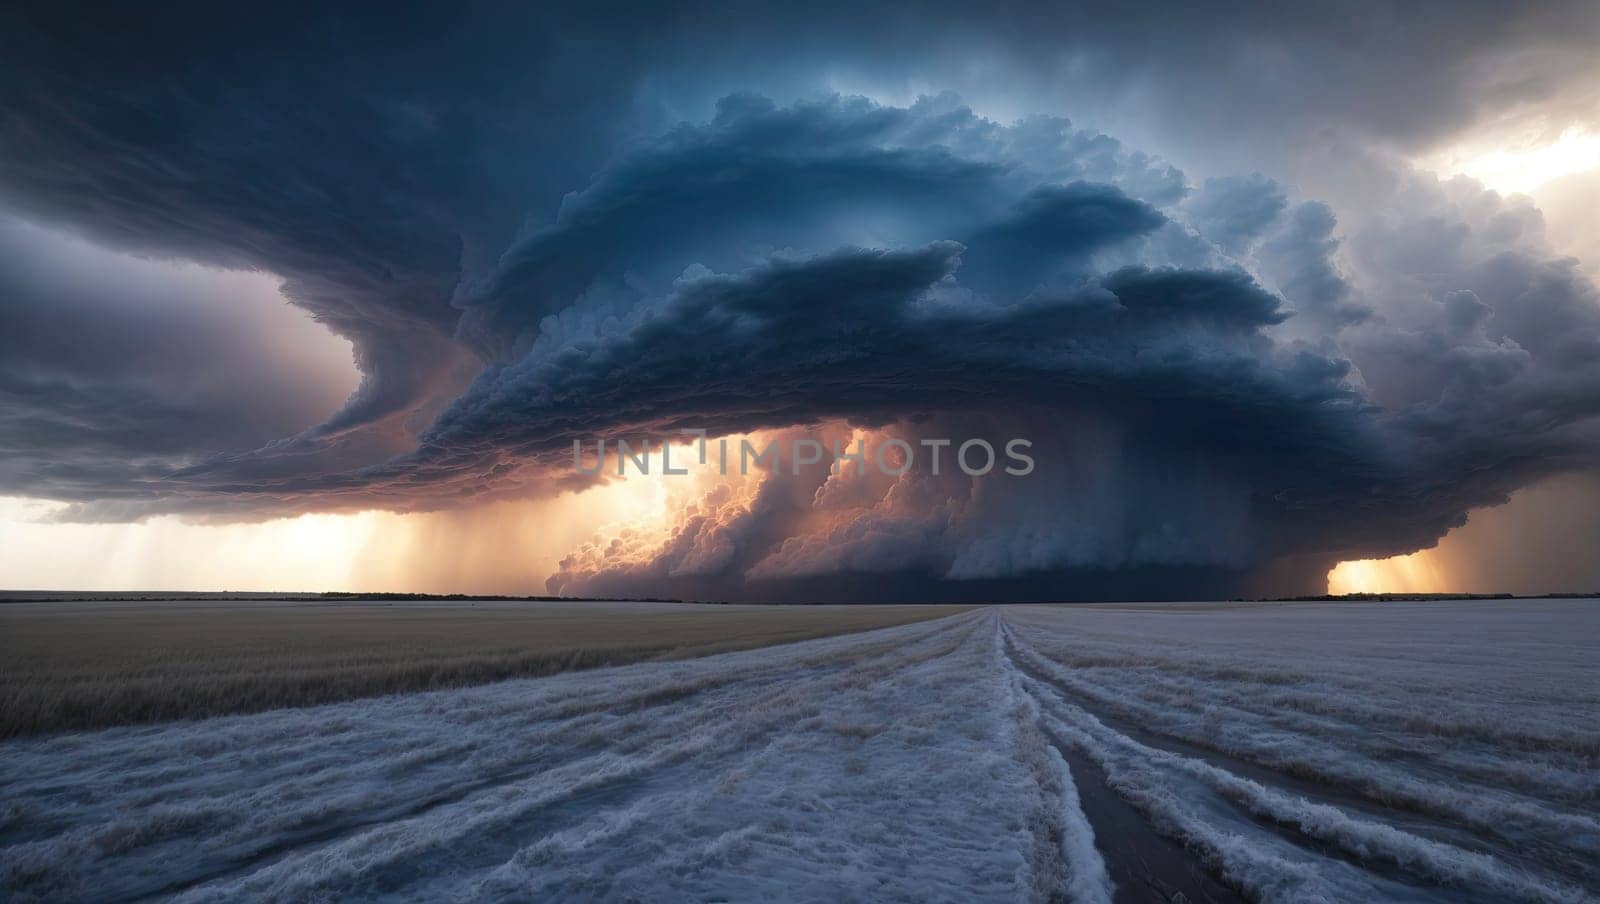 Epic dramatic storm cell in the Midwestern landscape by applesstock